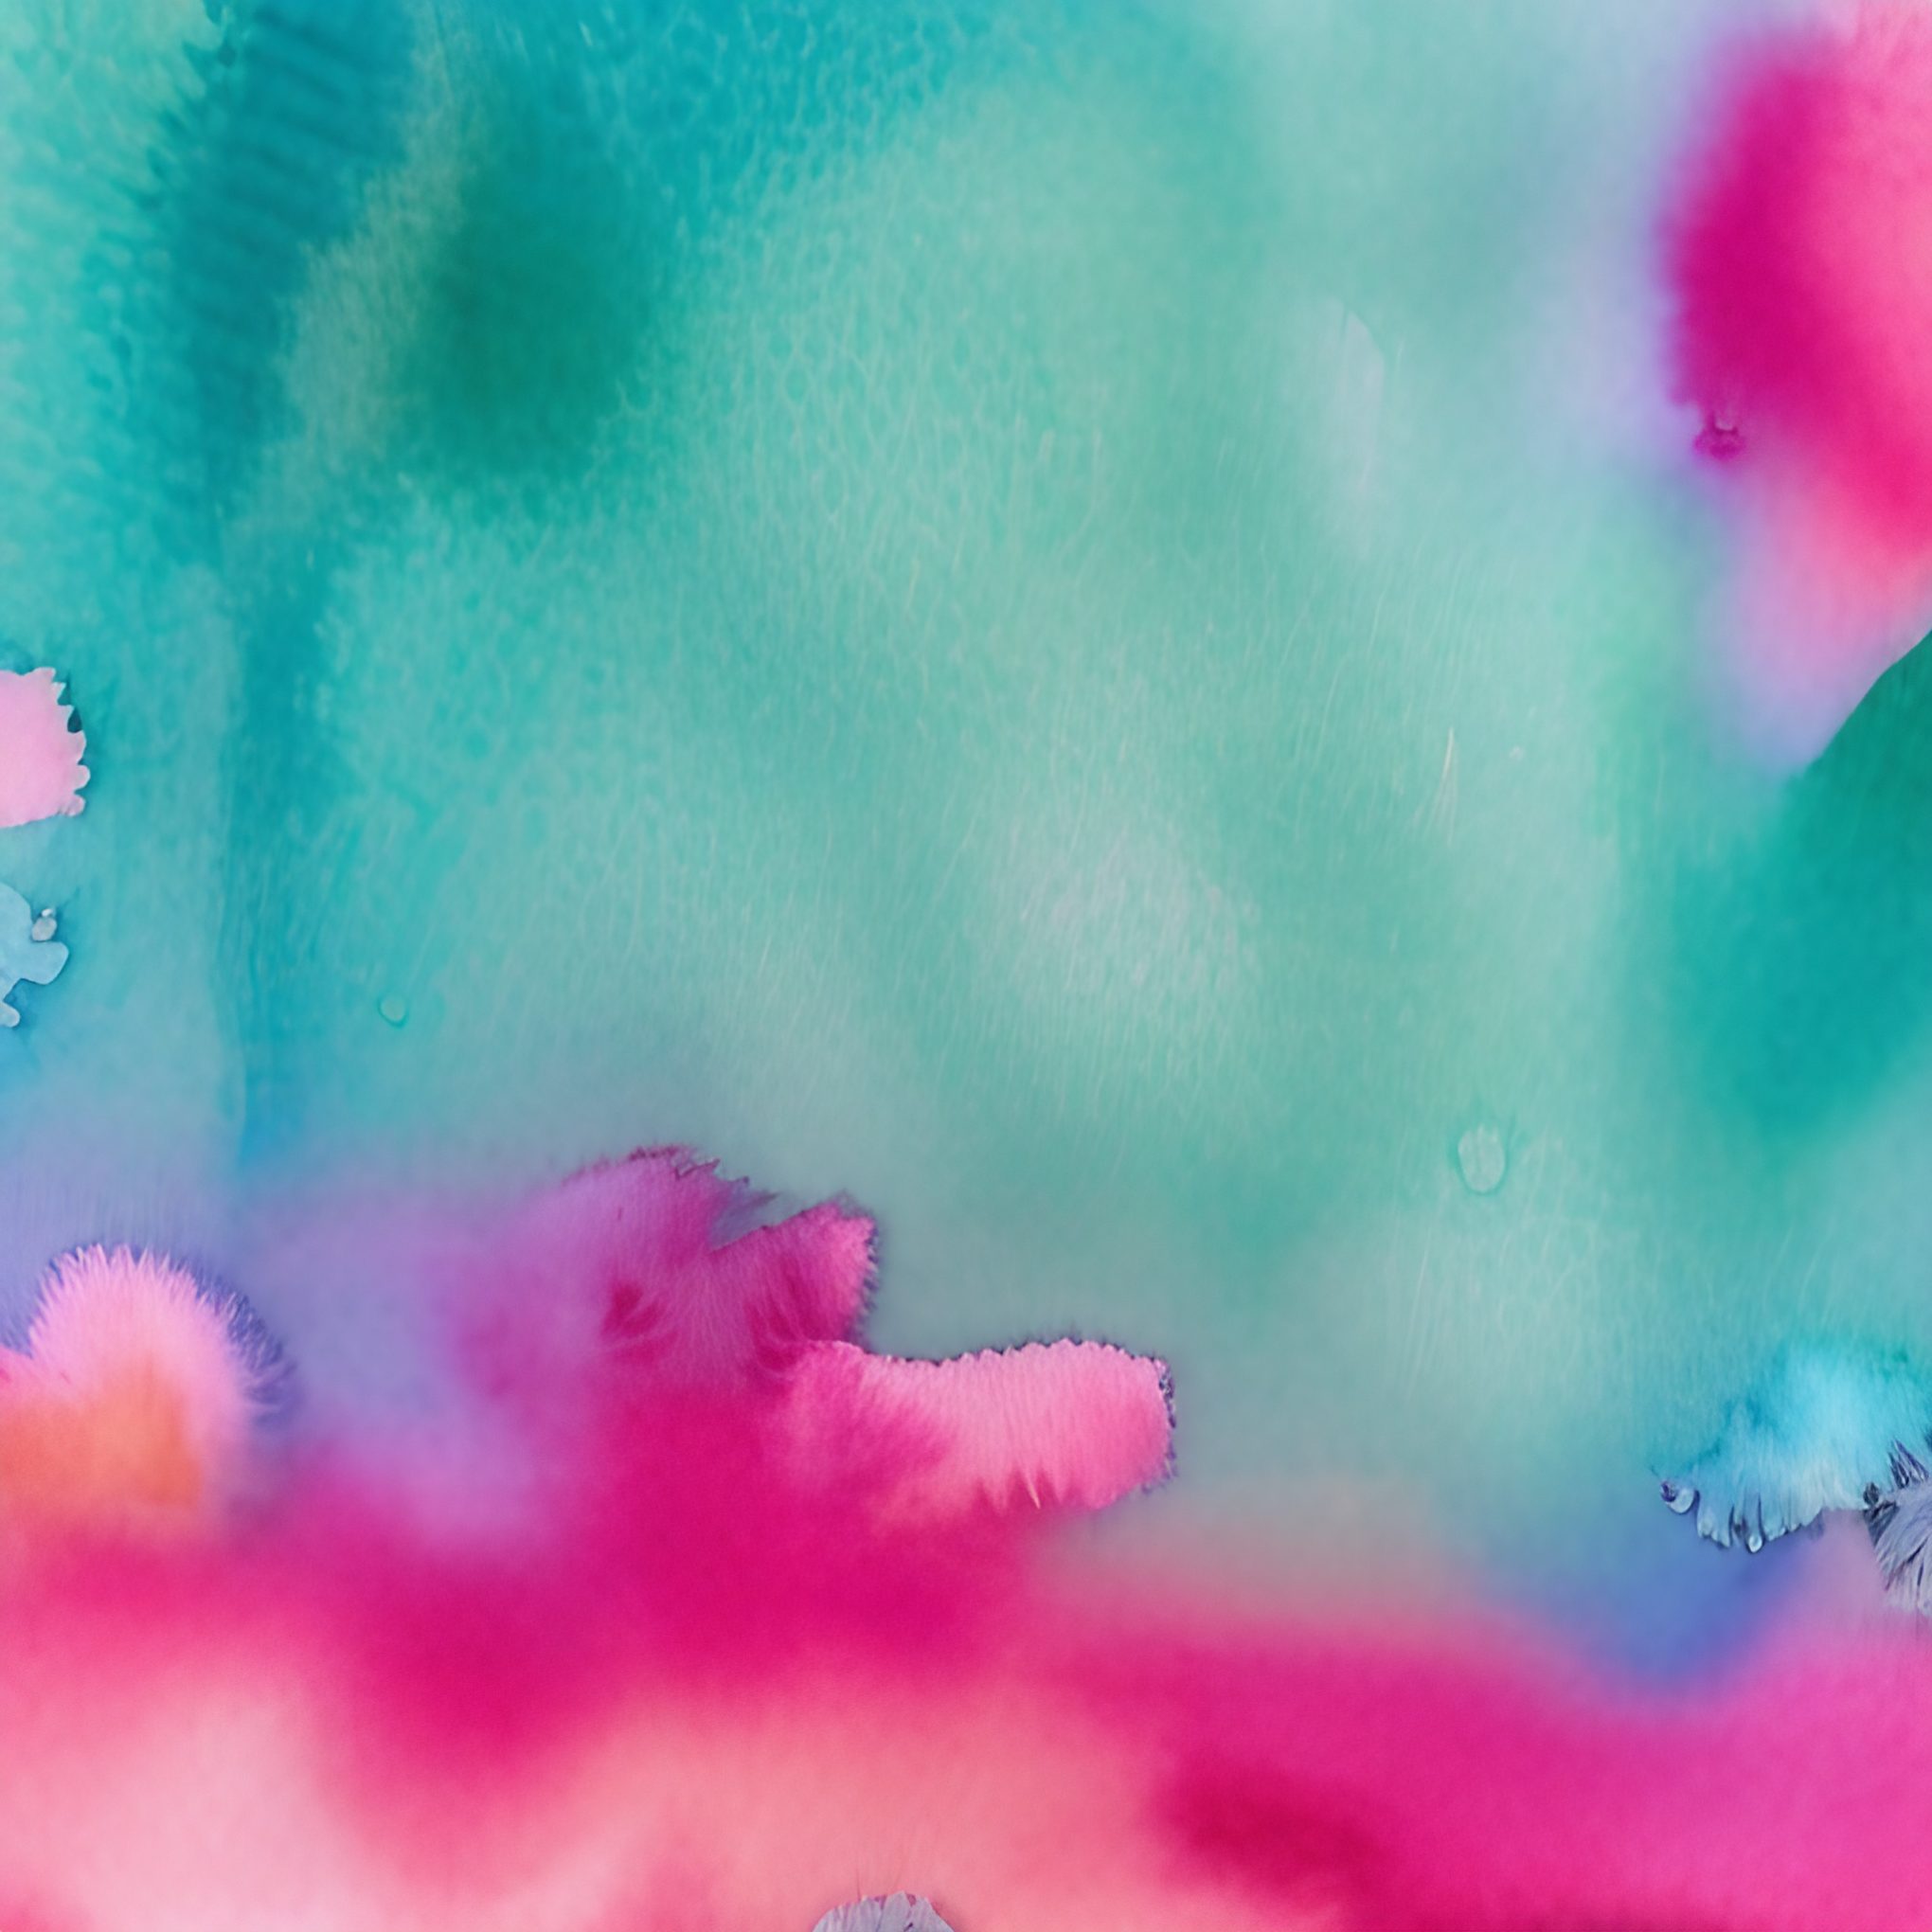 Pink and Teal Watercolor Free Image Download